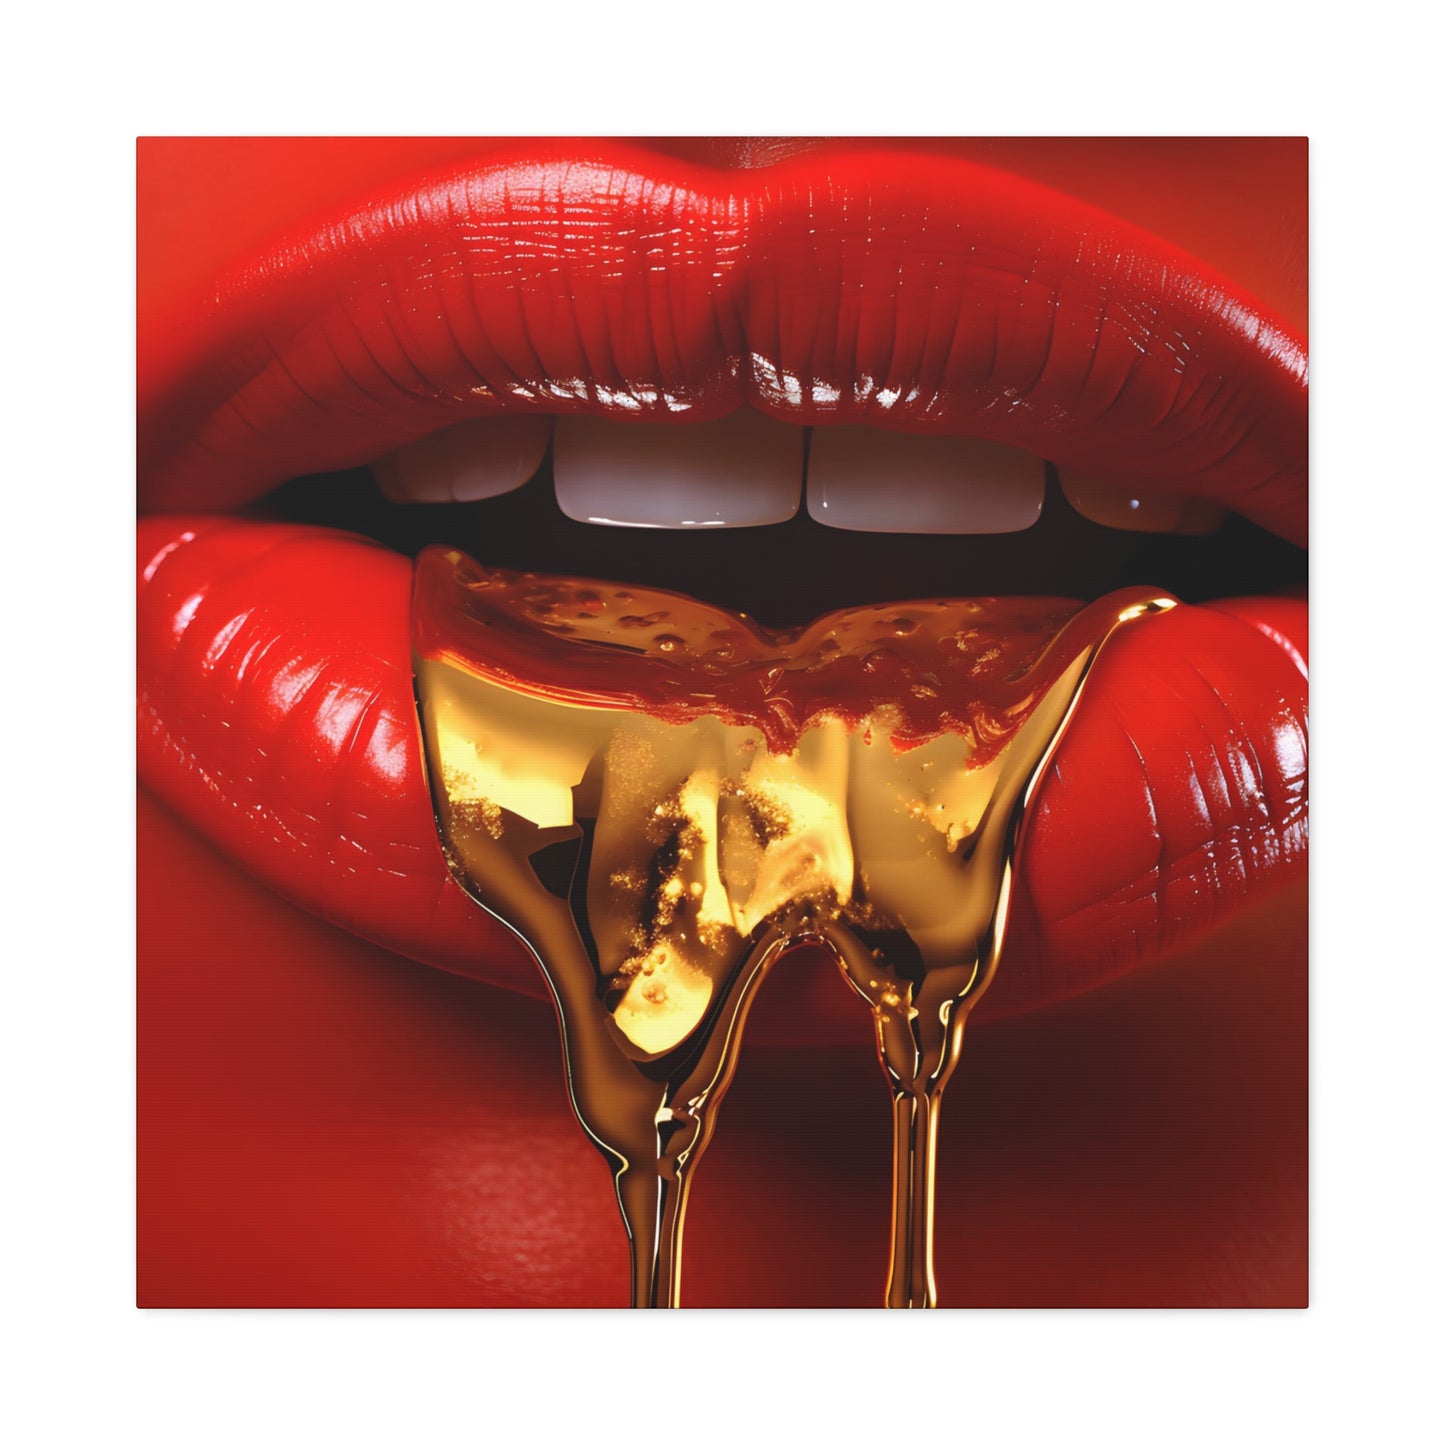 imaghe 4 Golden Seduction by Cassian Marlowe, wall art depicting glossy red lips and molten gold, symbolizing allure and ambition in the theme of opulence